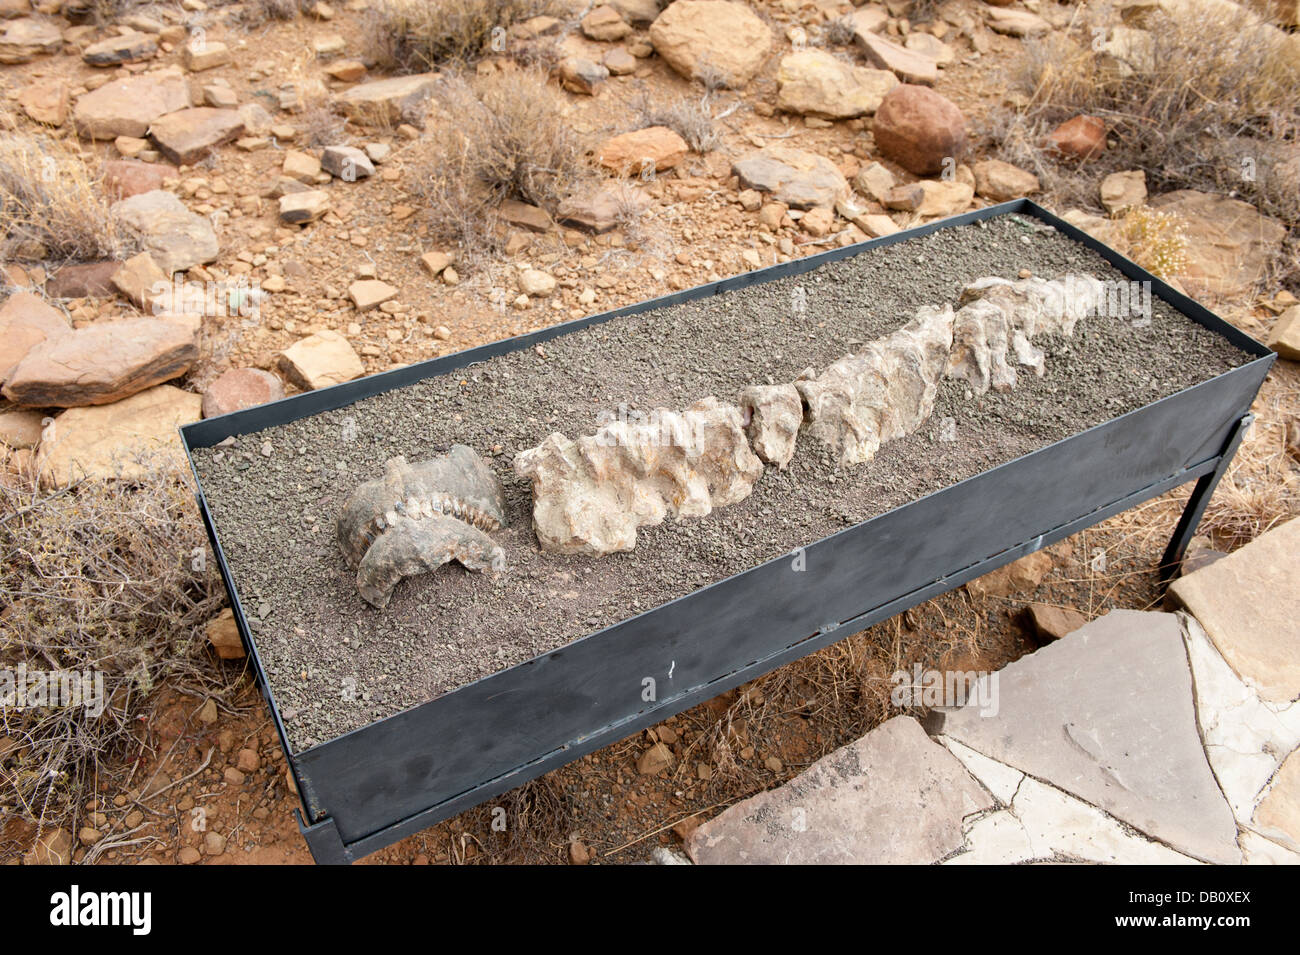 Display on the Fossil Trail, Karroo National Park, Beaufort West, South Africa Stock Photo